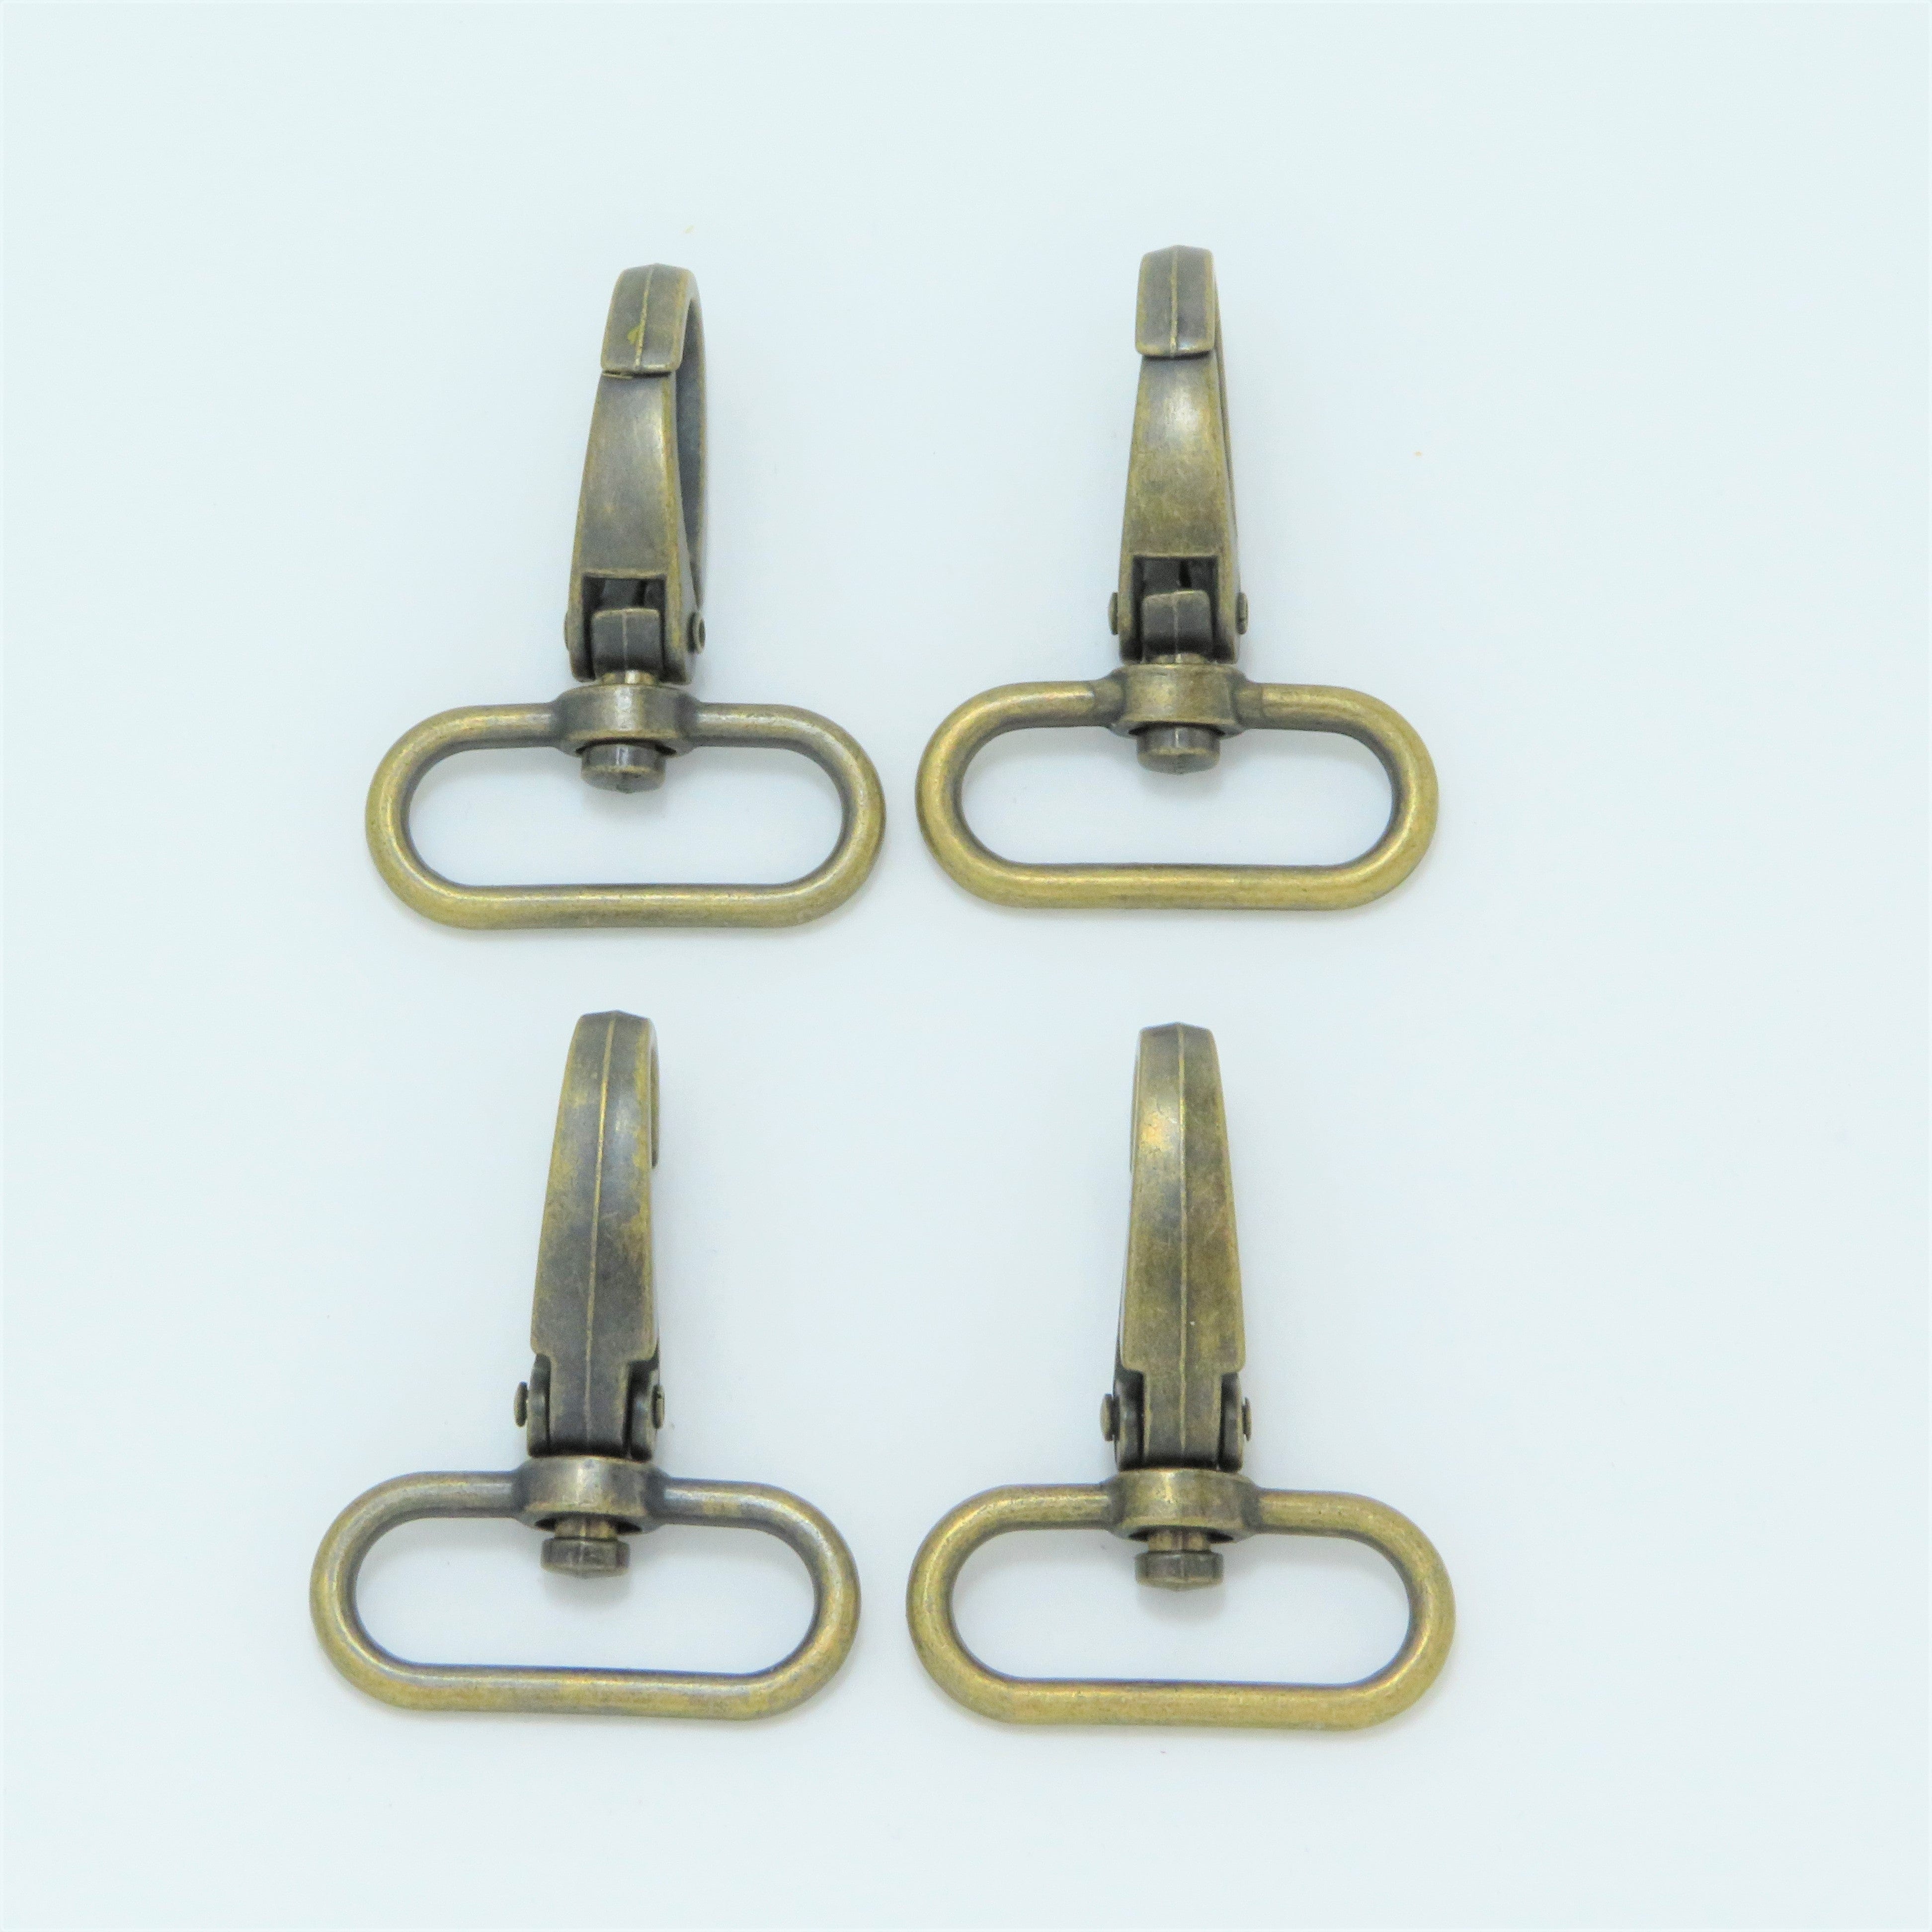 1pcs Metal Swivel O-ring Eye Snap Hook Trigger Clasps Clips for Leather  Craft Bag Strap